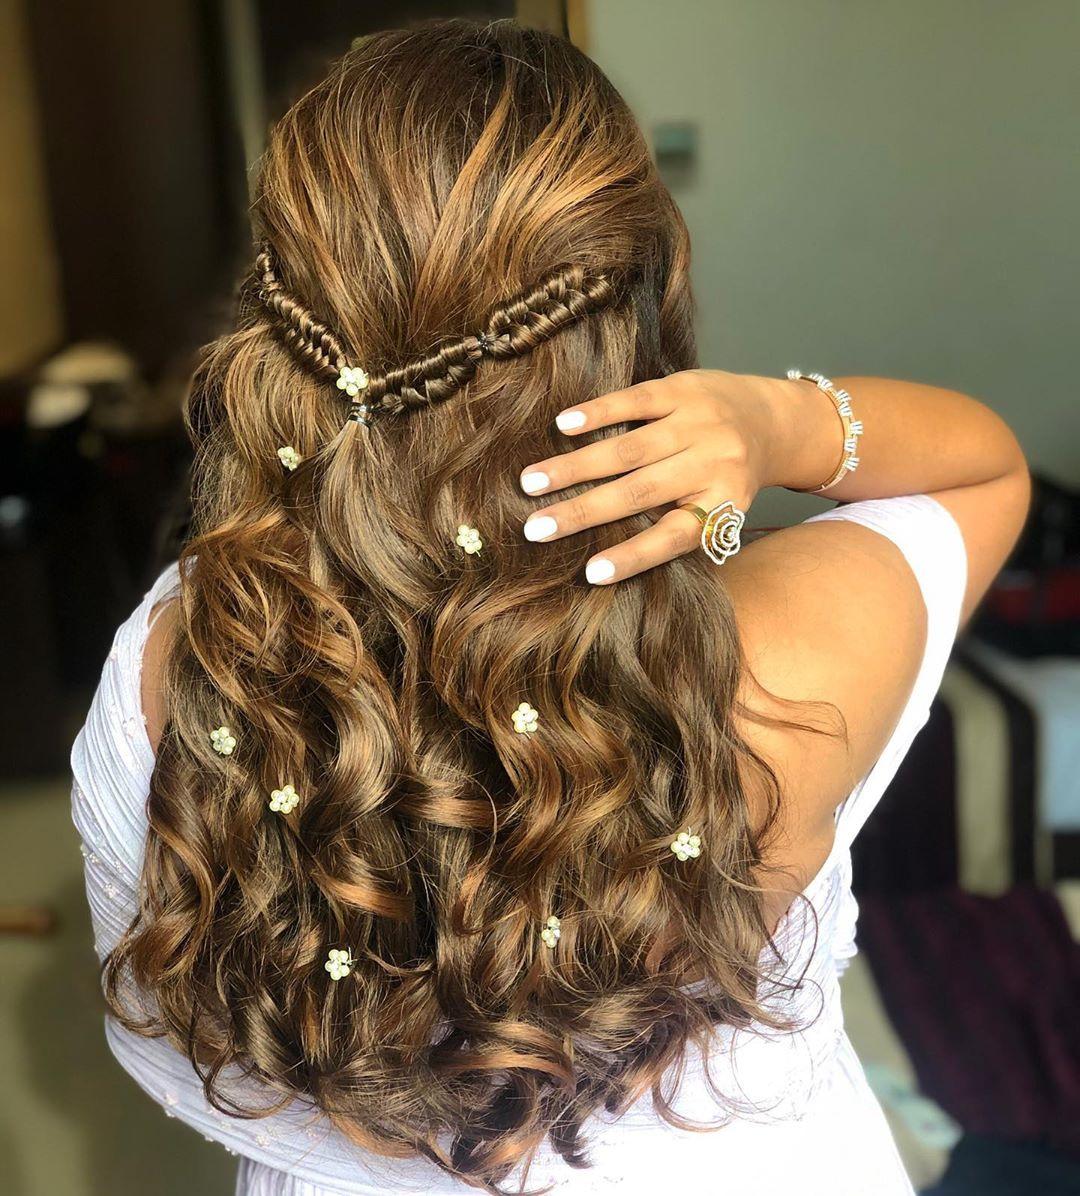 50+ Wedding Guest Hairstyles from Easy to Trendy